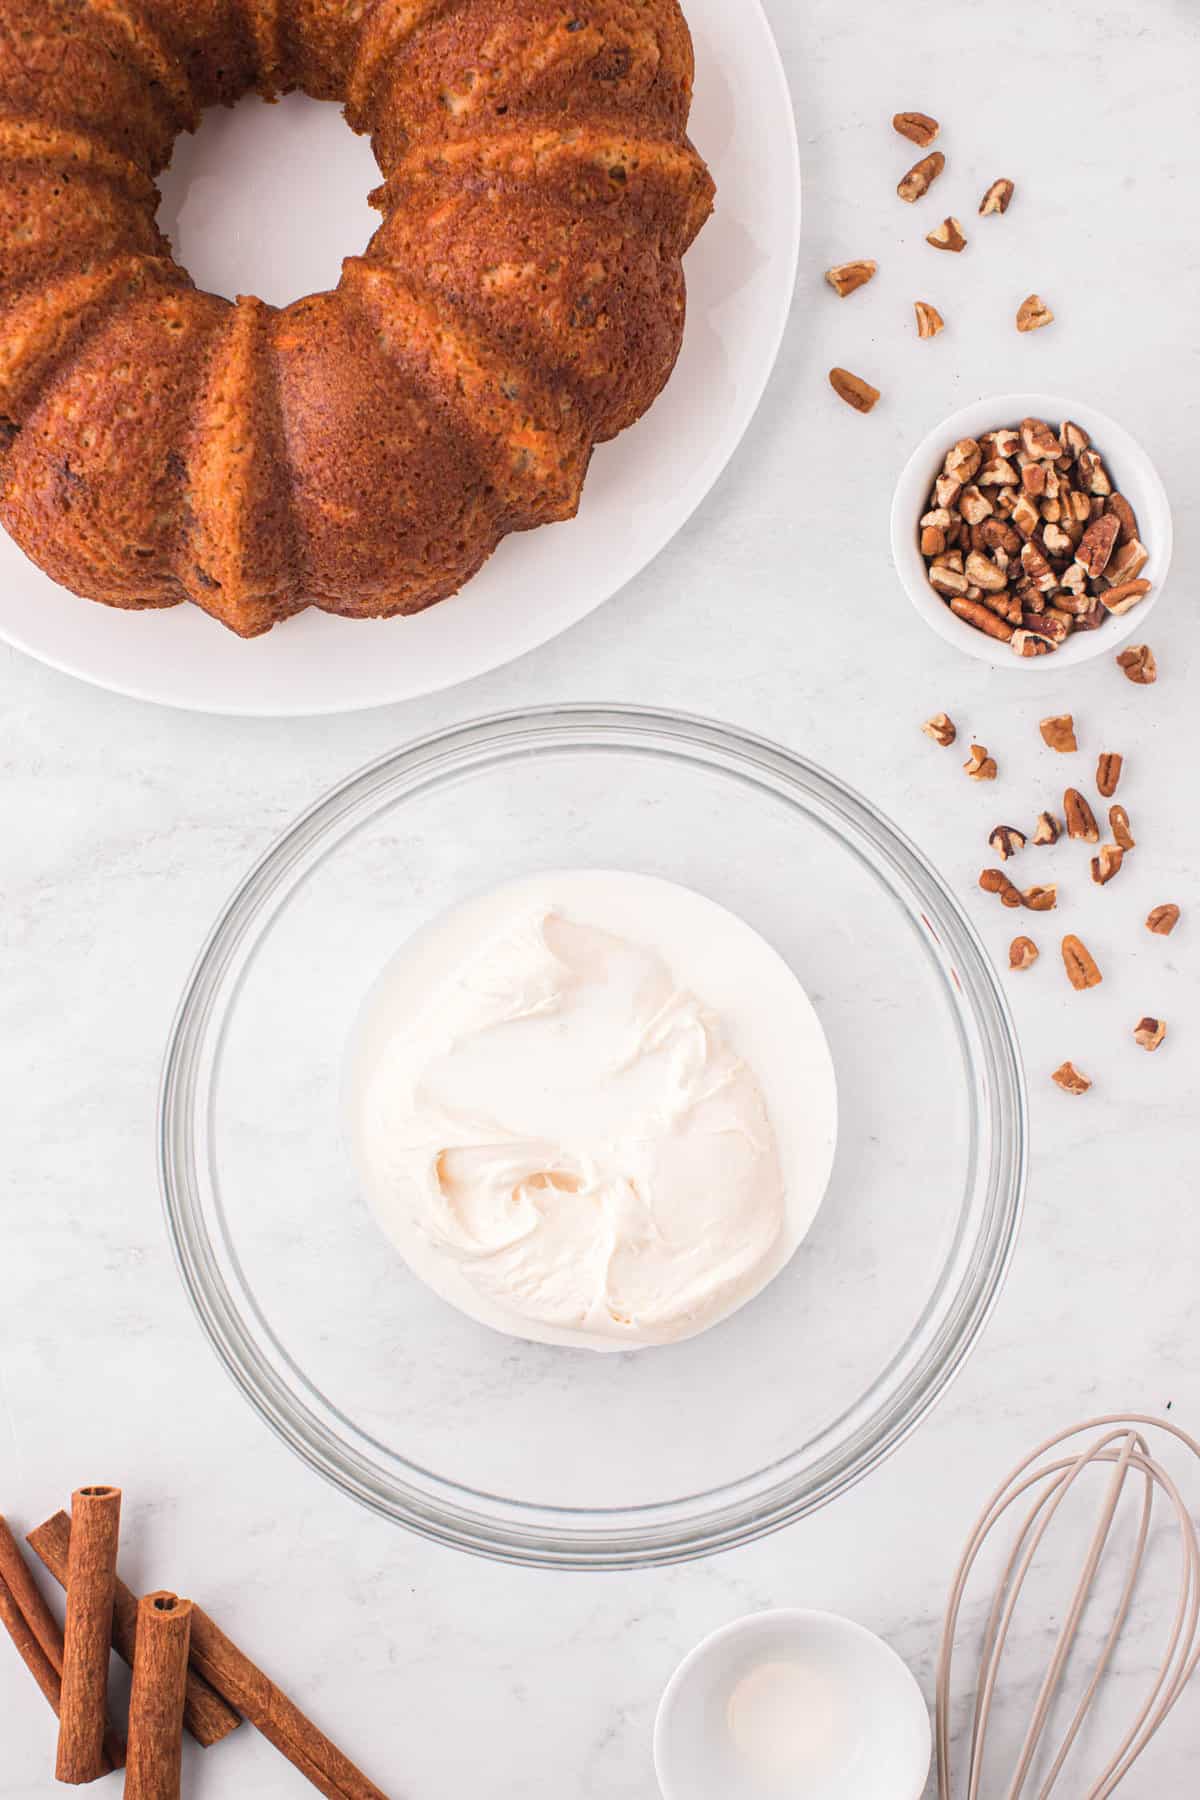 Cream Cheese Frosting in Bowl for Carrot Bundt Cake Recipe